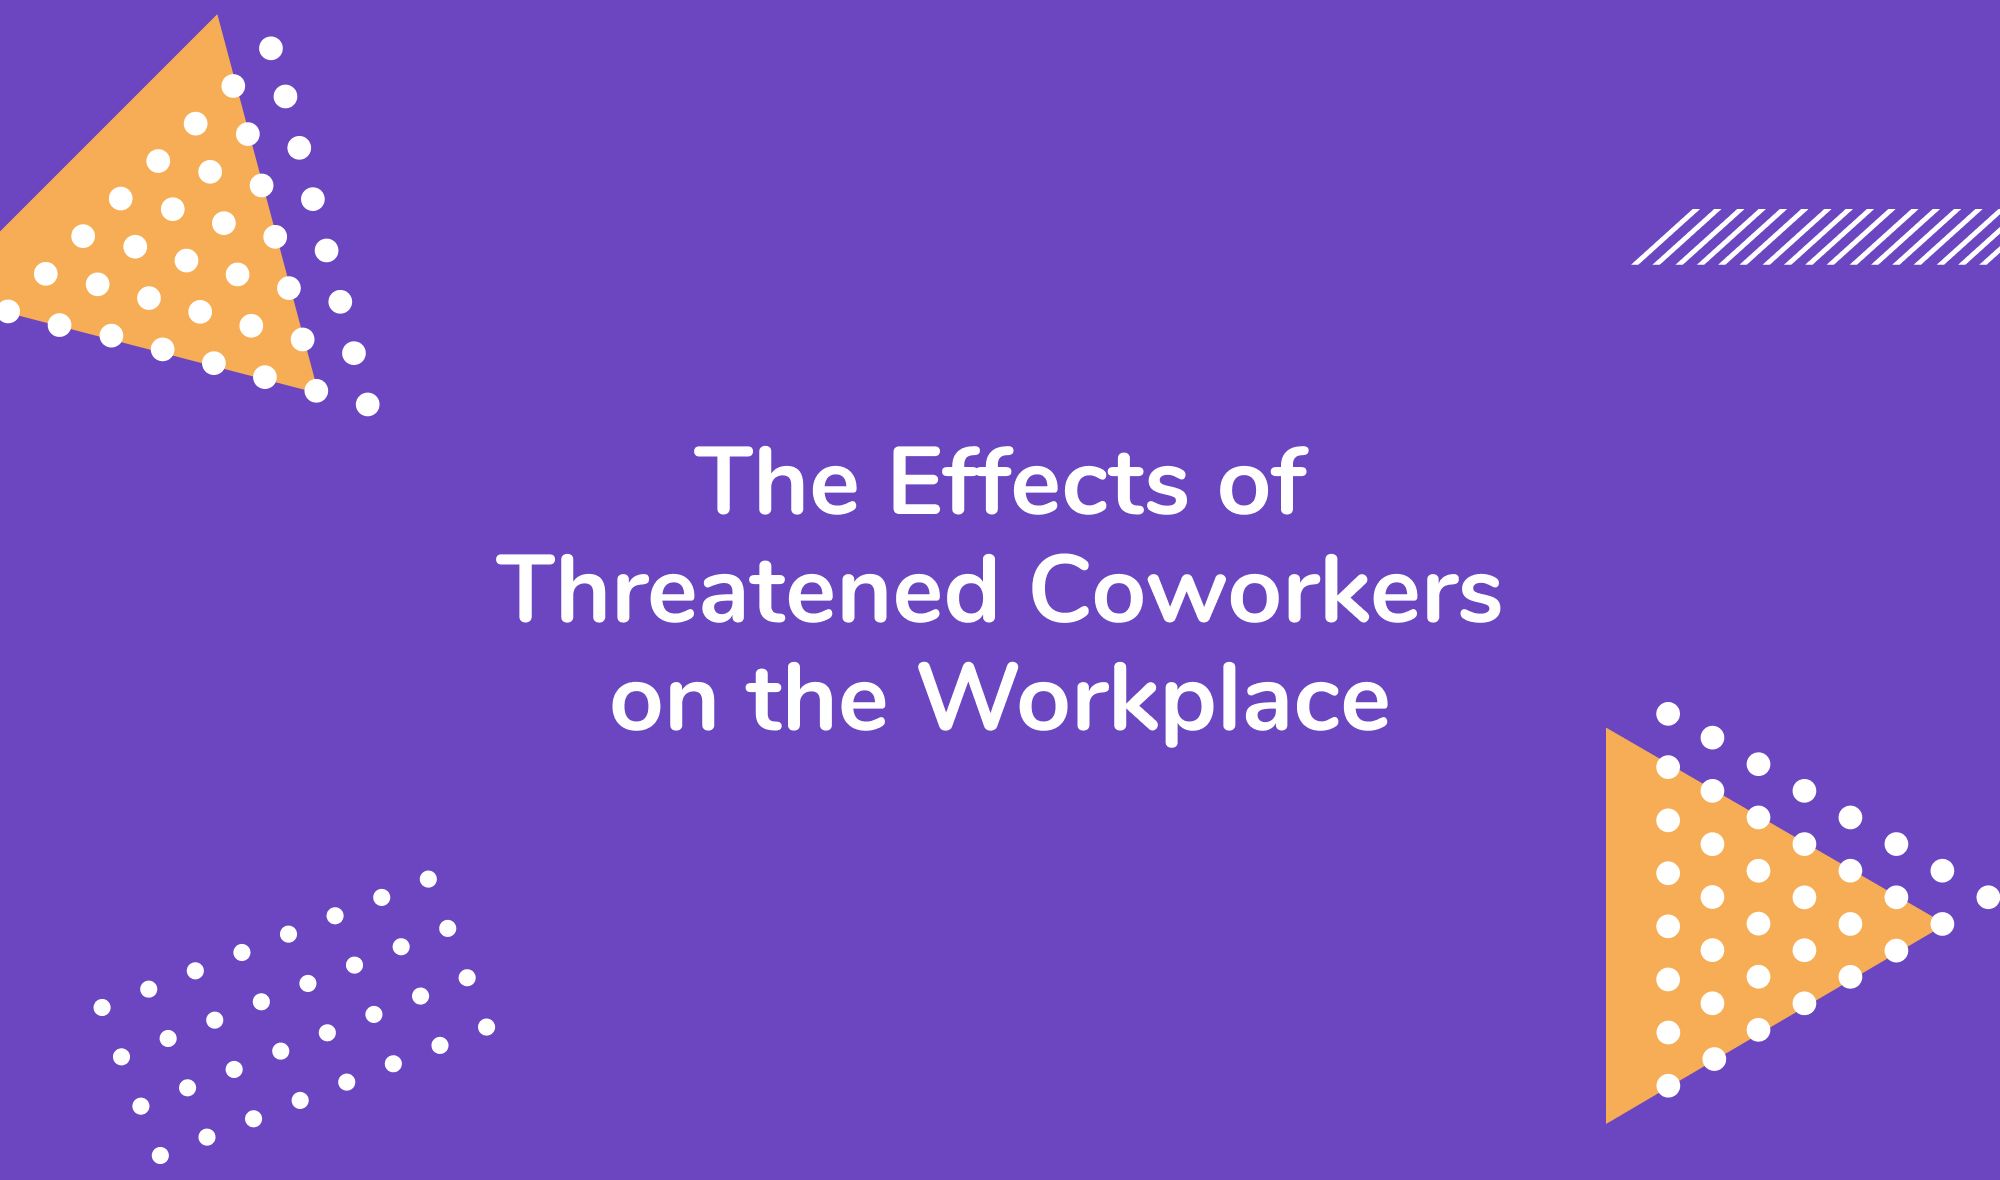 The Effects of Threatened Coworkers on the Workplace